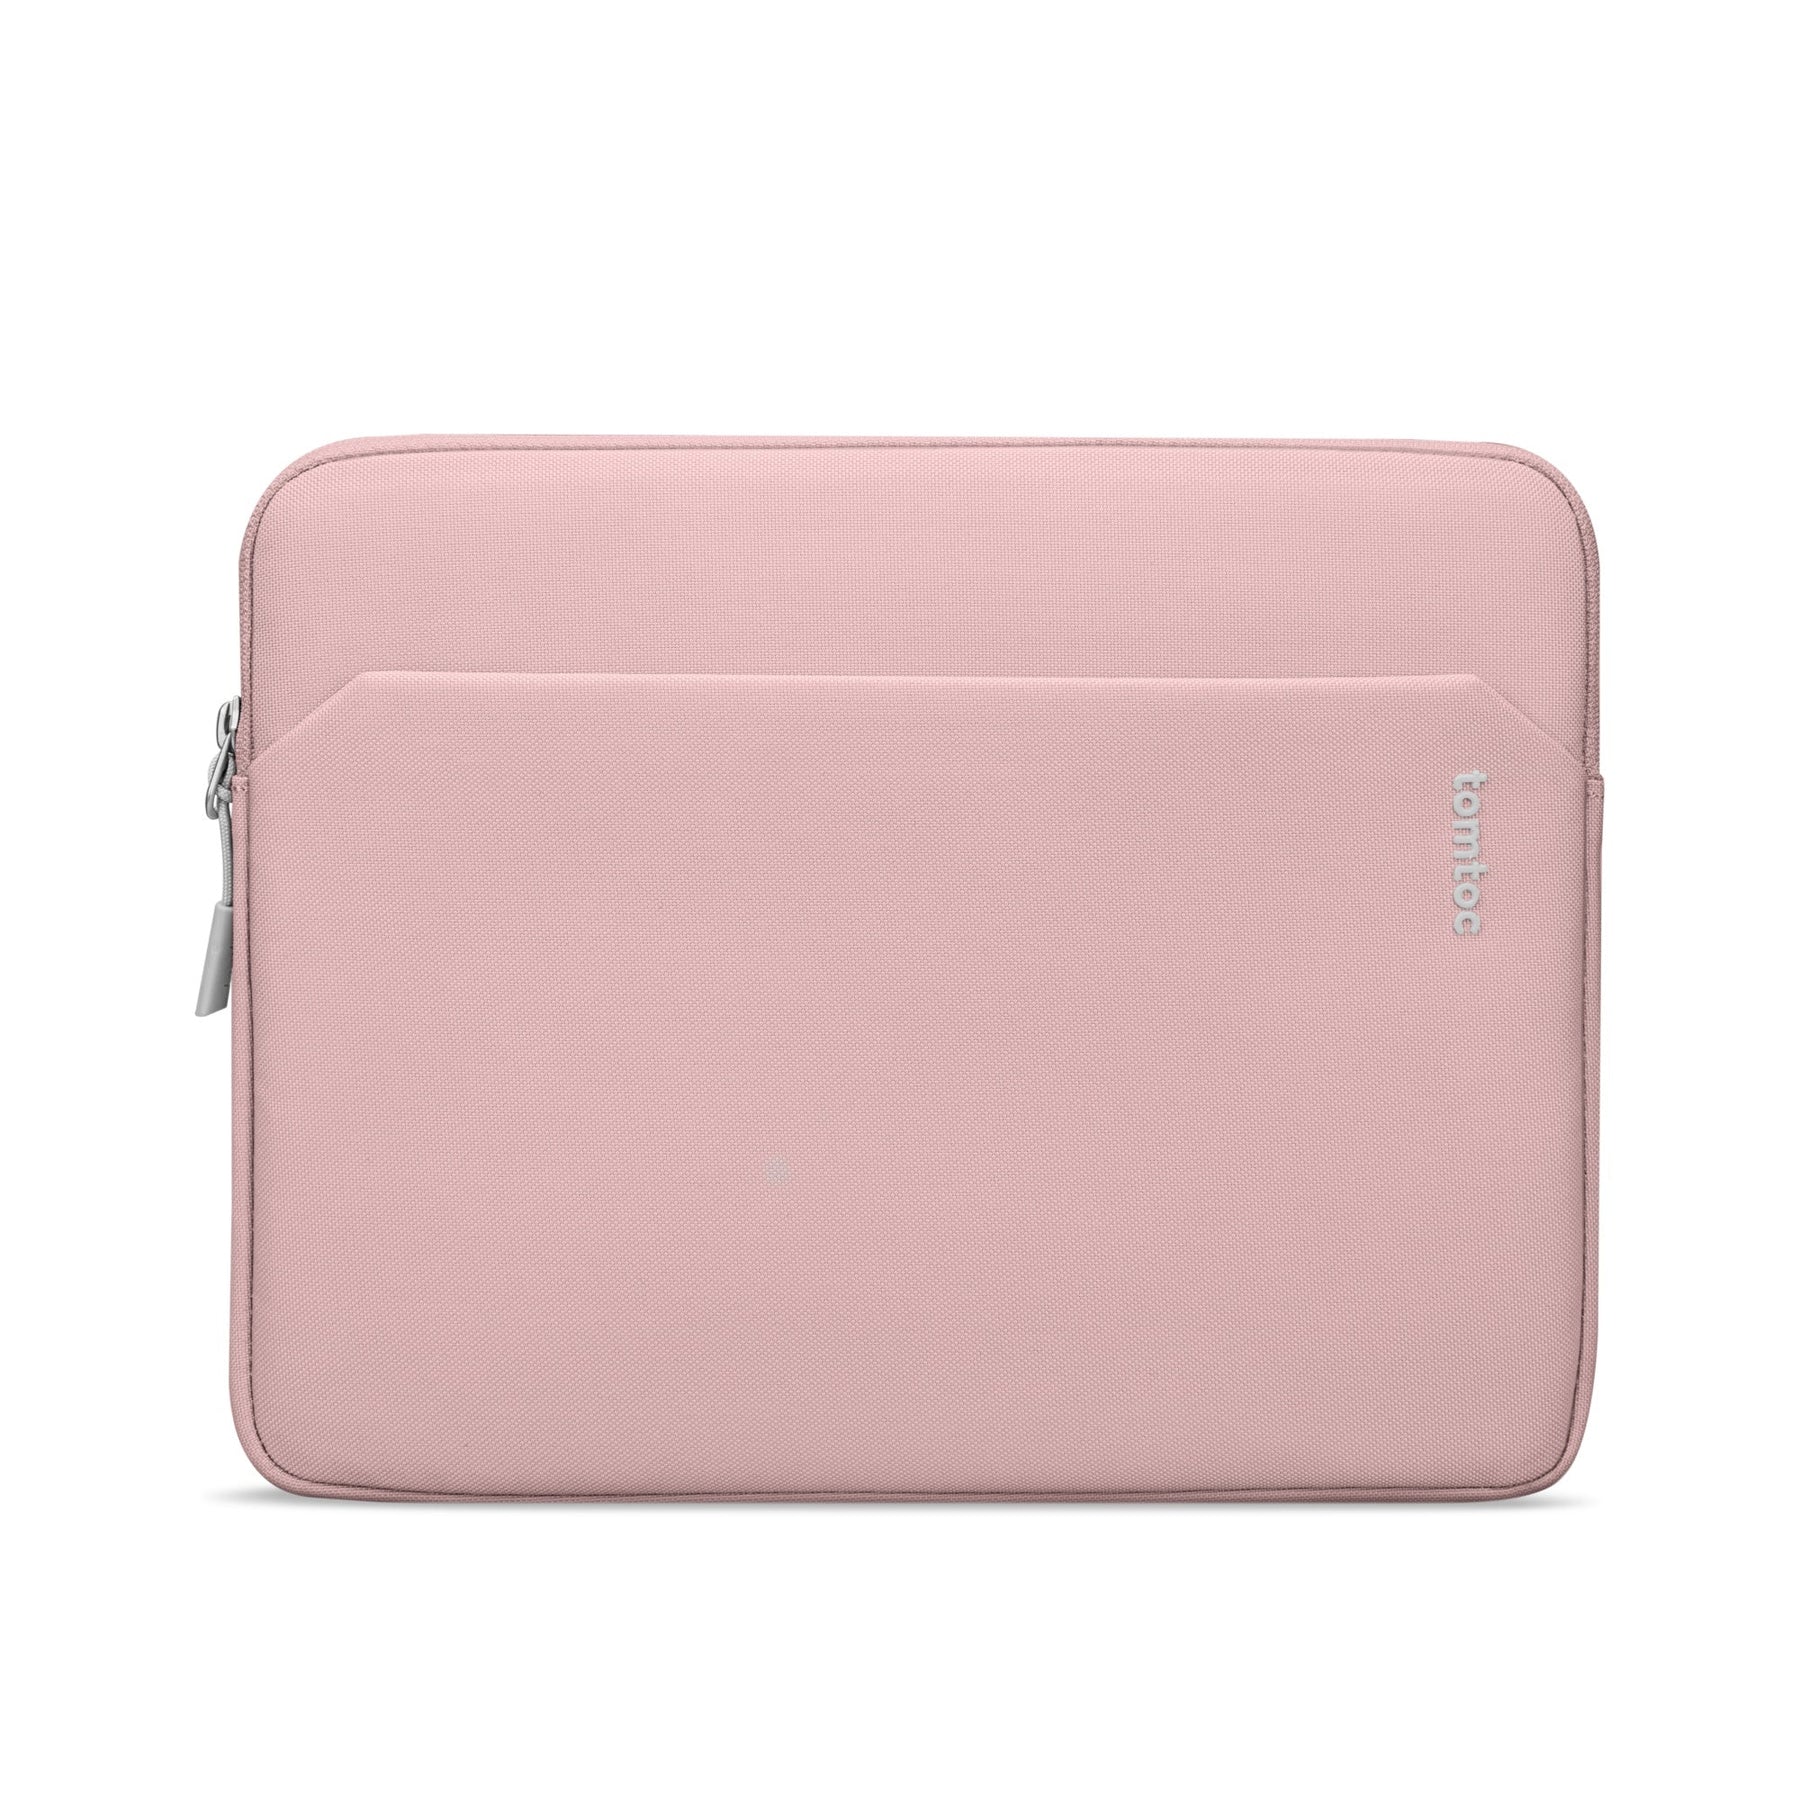 Light-B18 Tablet Sleeve for 12.9 inch iPad Pro